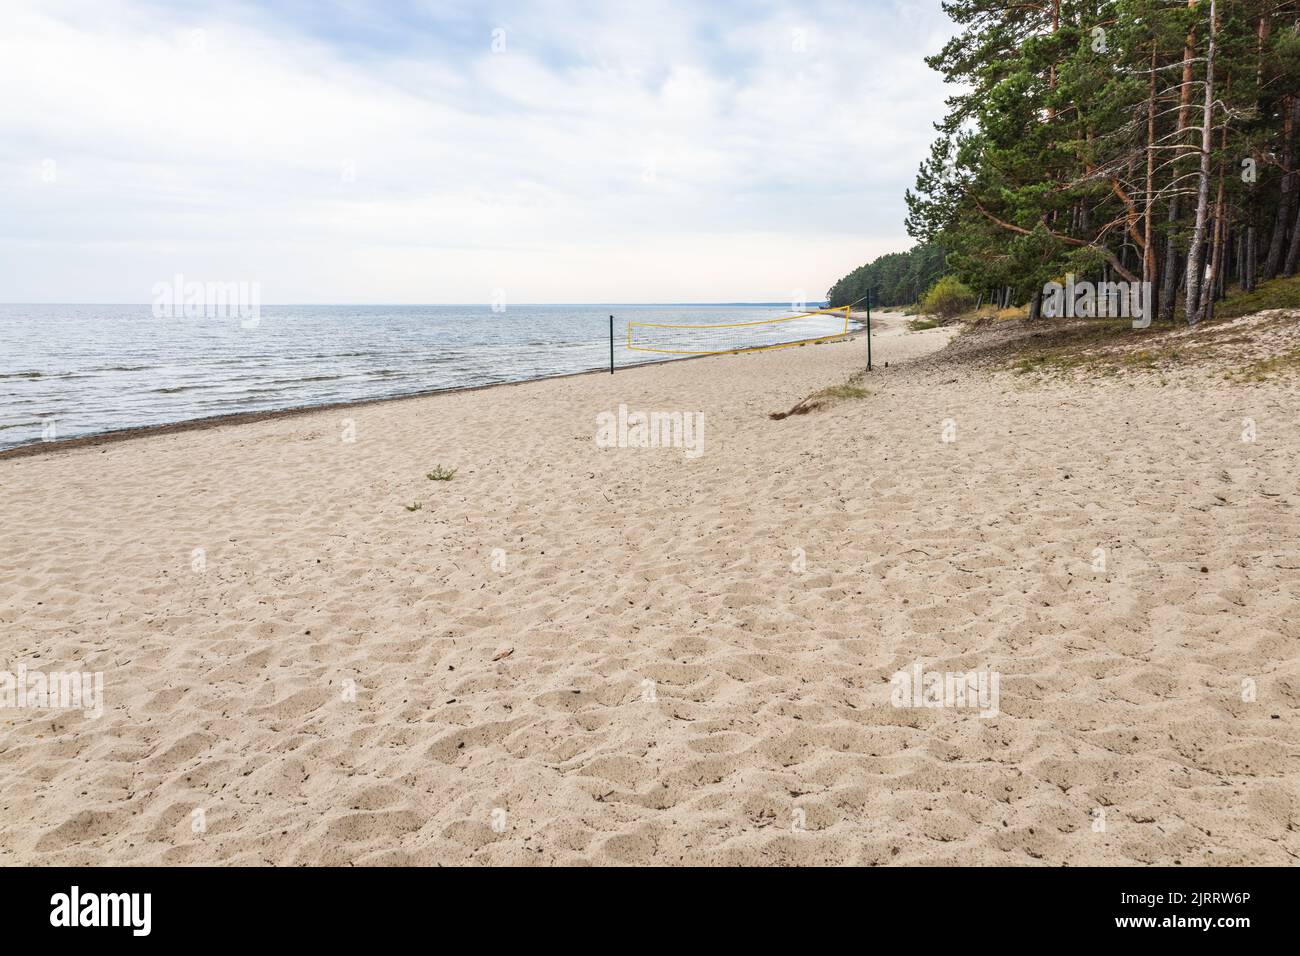 A beautiful landscape for leisure with beach and dunes near the Baltic sea Stock Photo